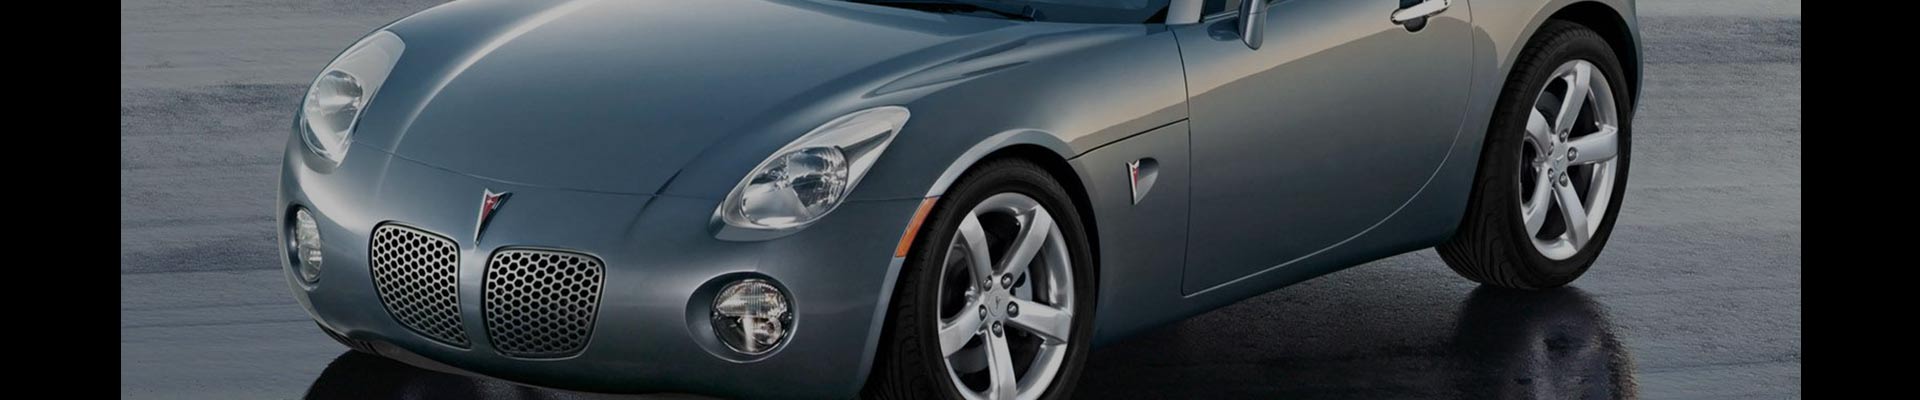 Shop Replacement and OEM 2009 Pontiac Solstice Parts with Discounted Price on the Net